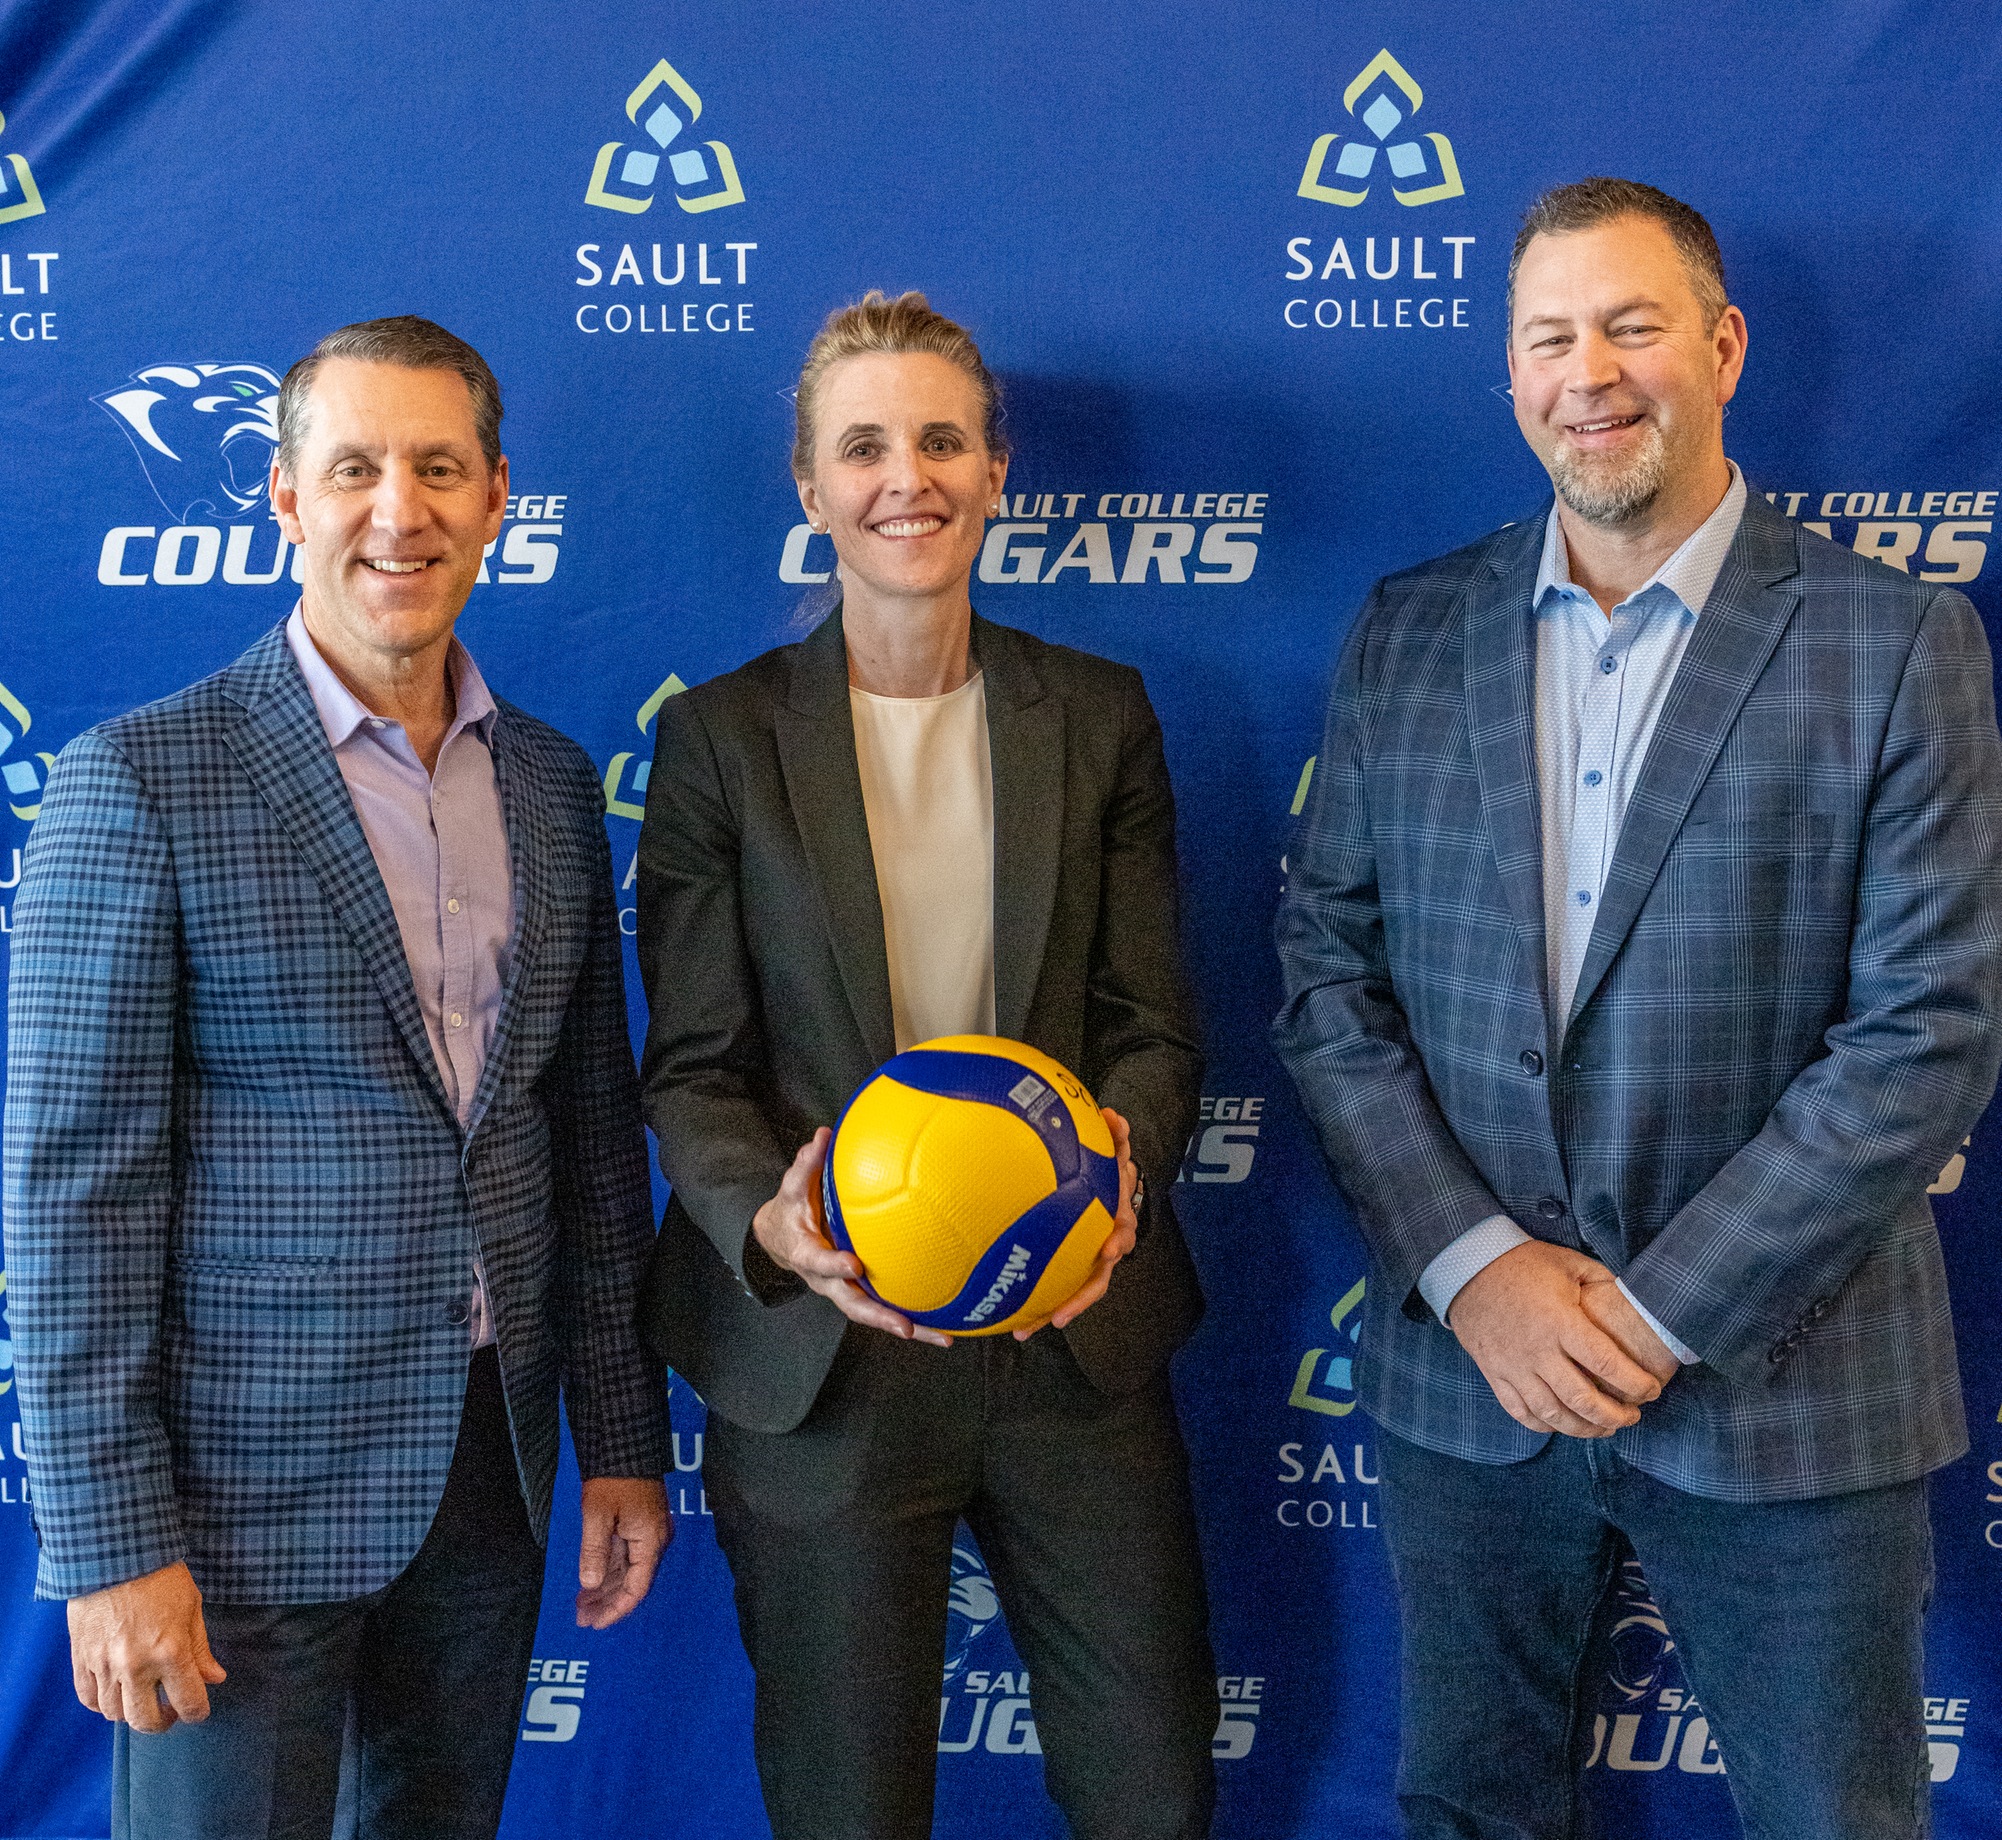 Sault College Announces Women's Volleyball Team!